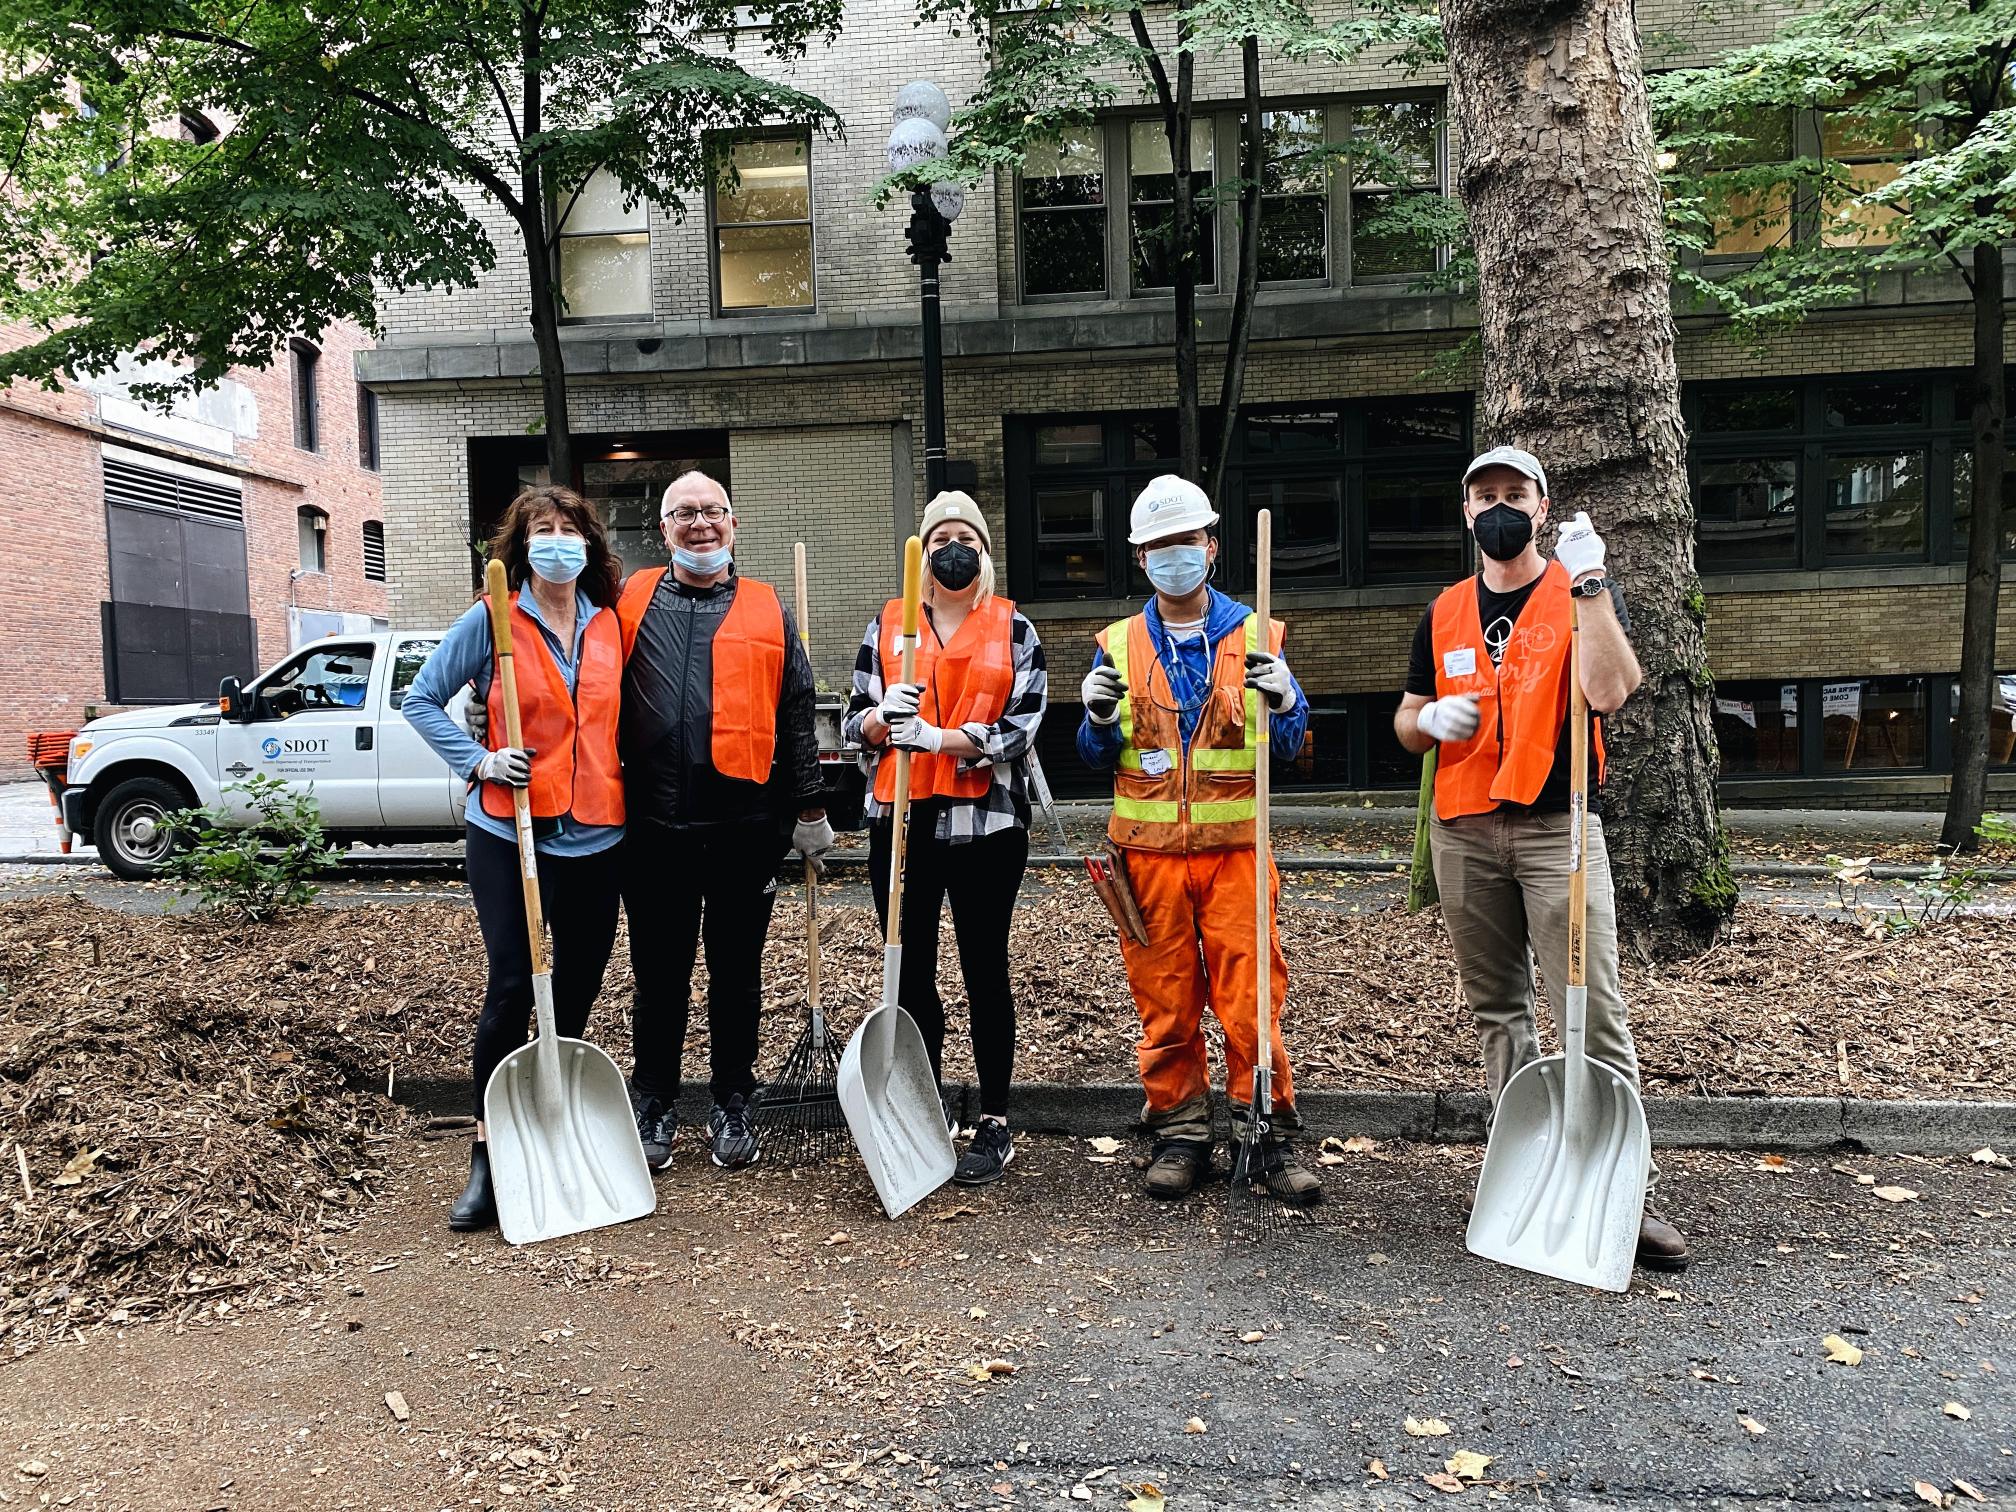 A group of five volunteers holding three shovels work to install new landscaping in Seattle's Pioneer Square neighborhood.